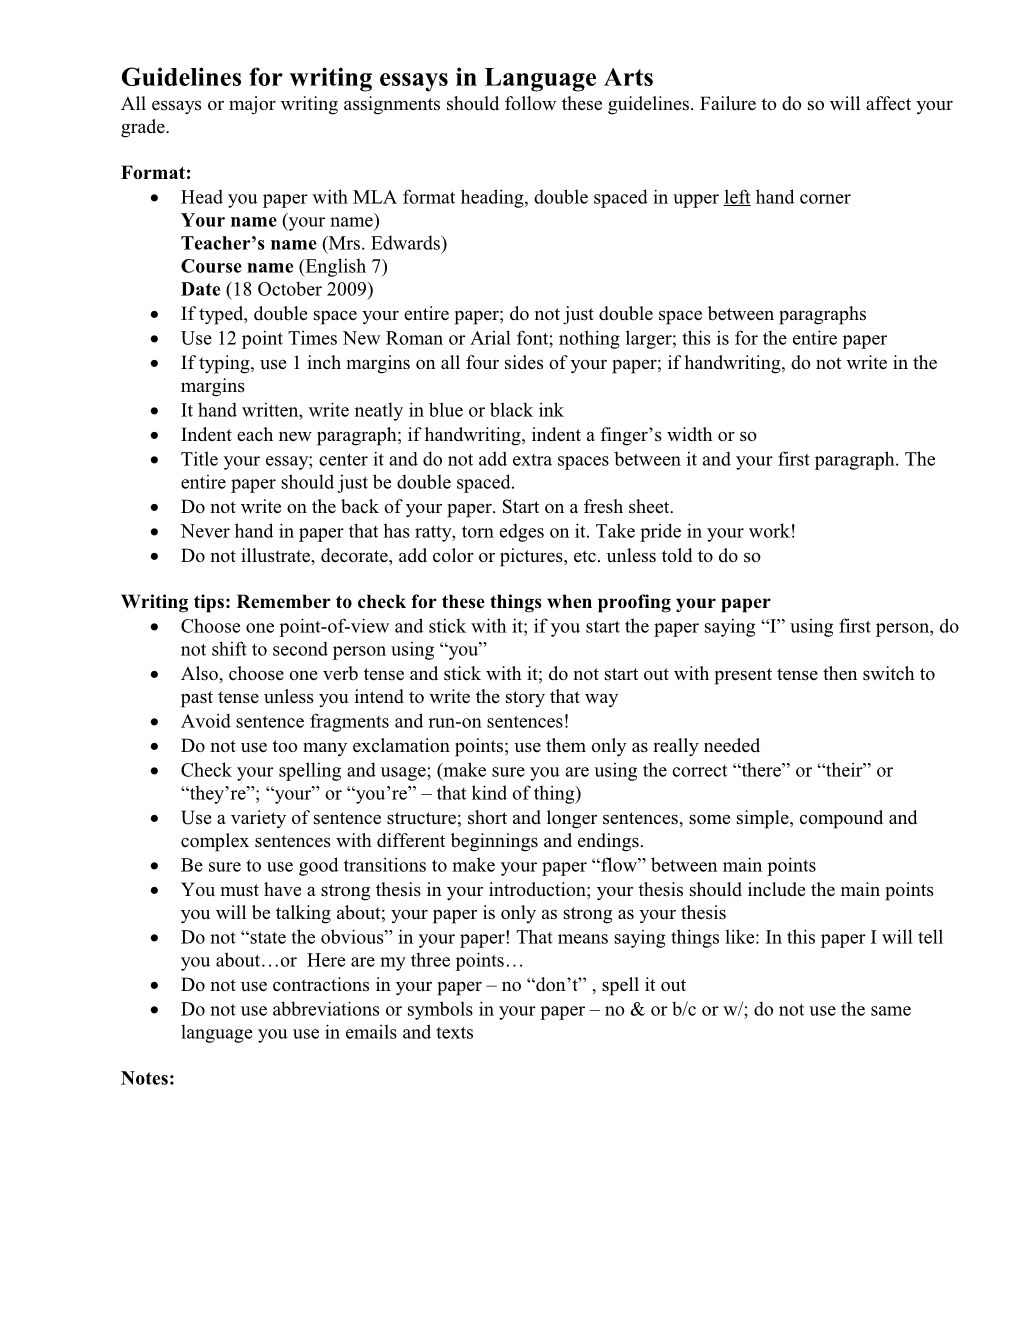 Guidelines for Writing Essays in English 7, Mrs